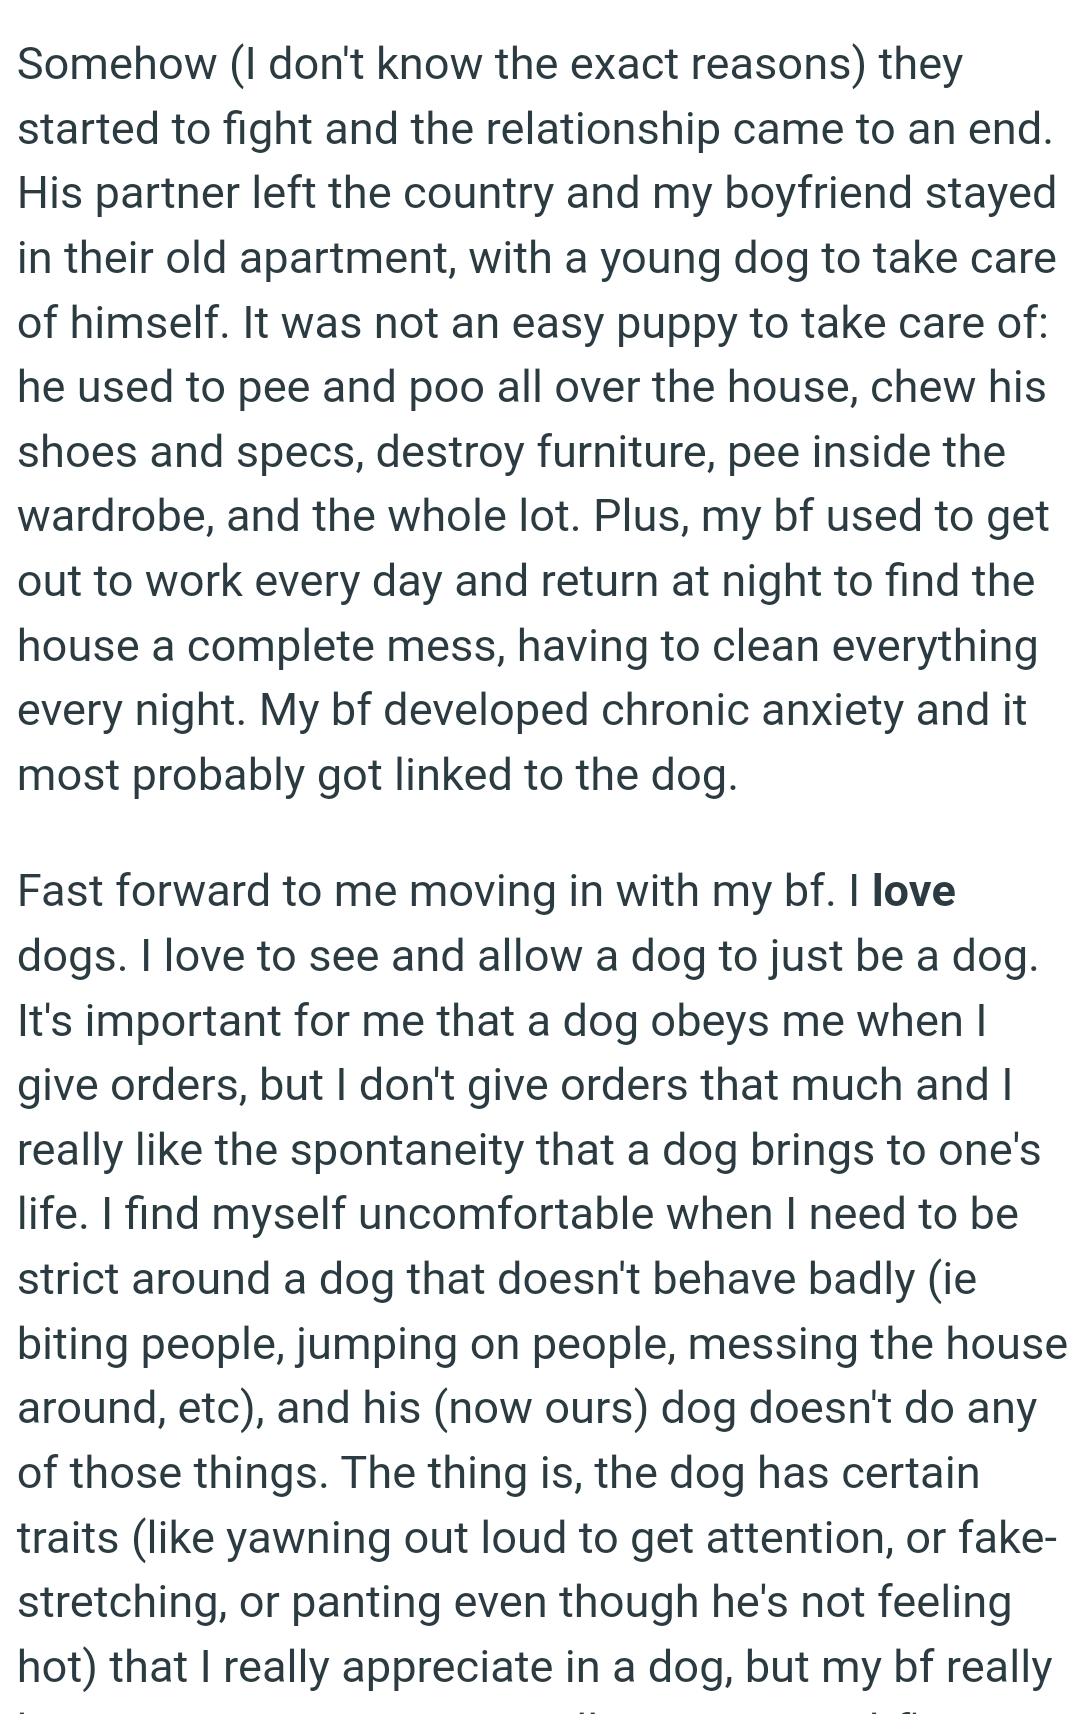 OP's bf developed chronic anxiety and it most probably got linked to the dog